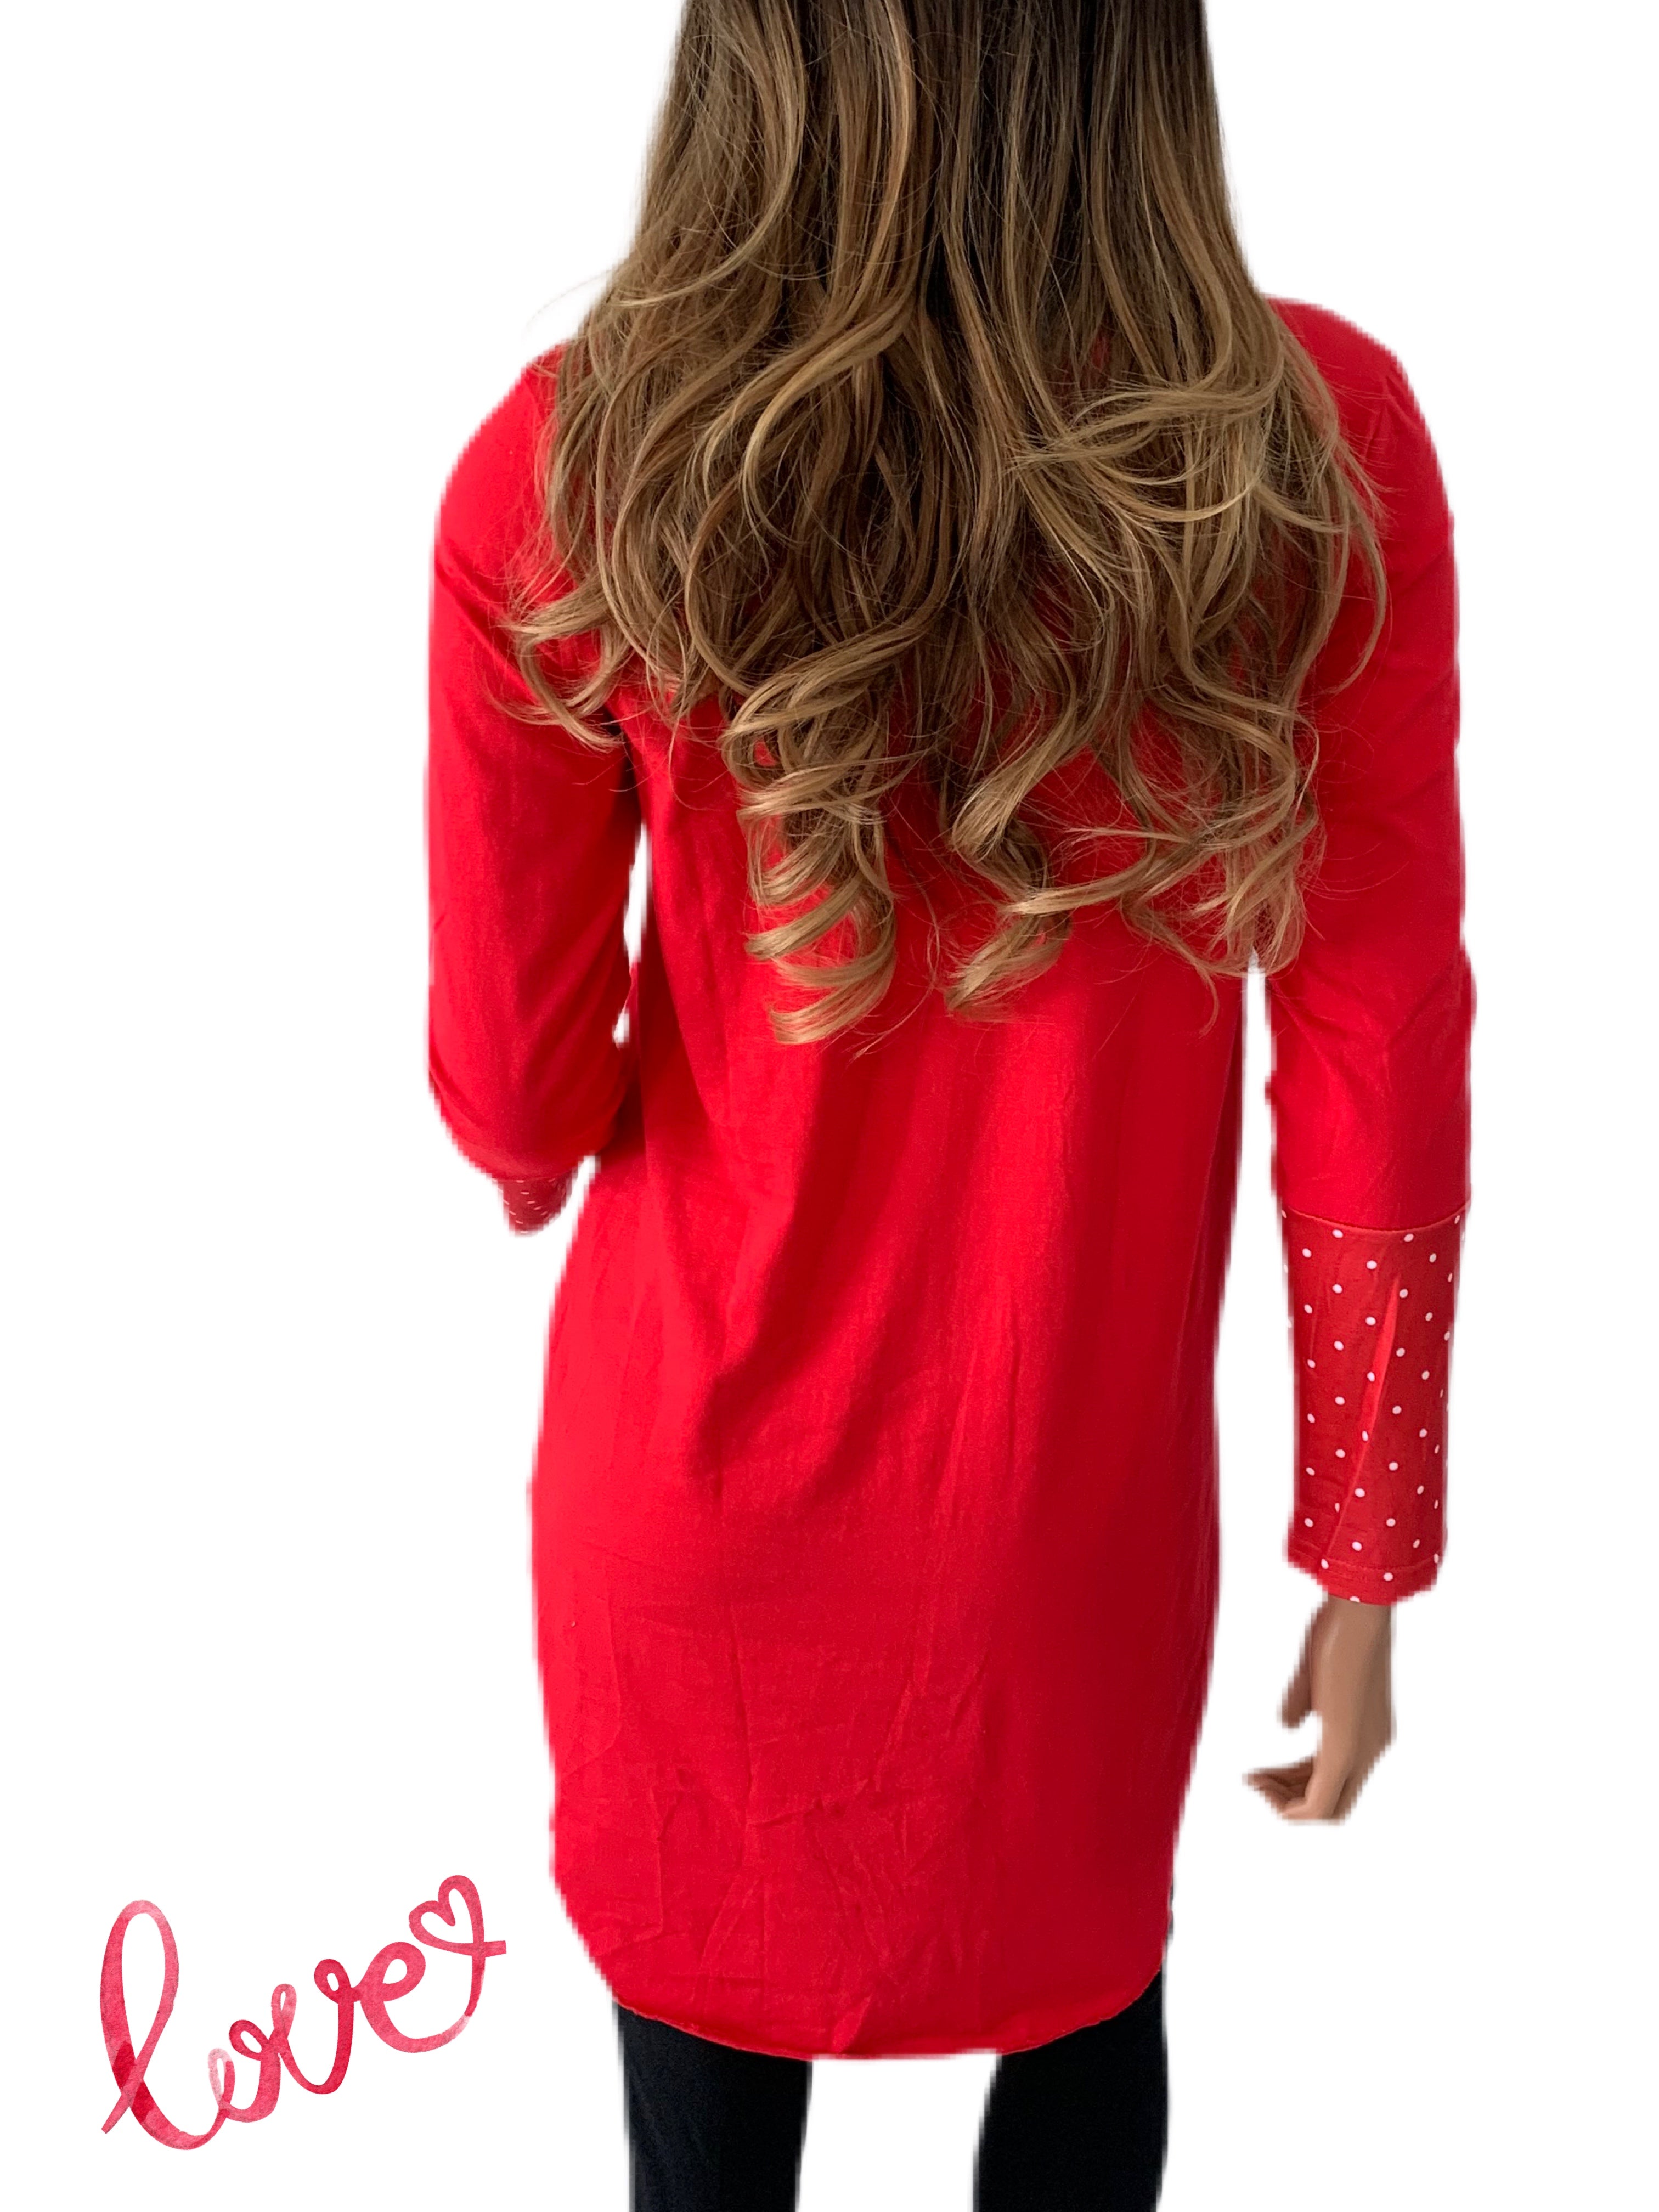 Red Polka Dot Accented Tunic